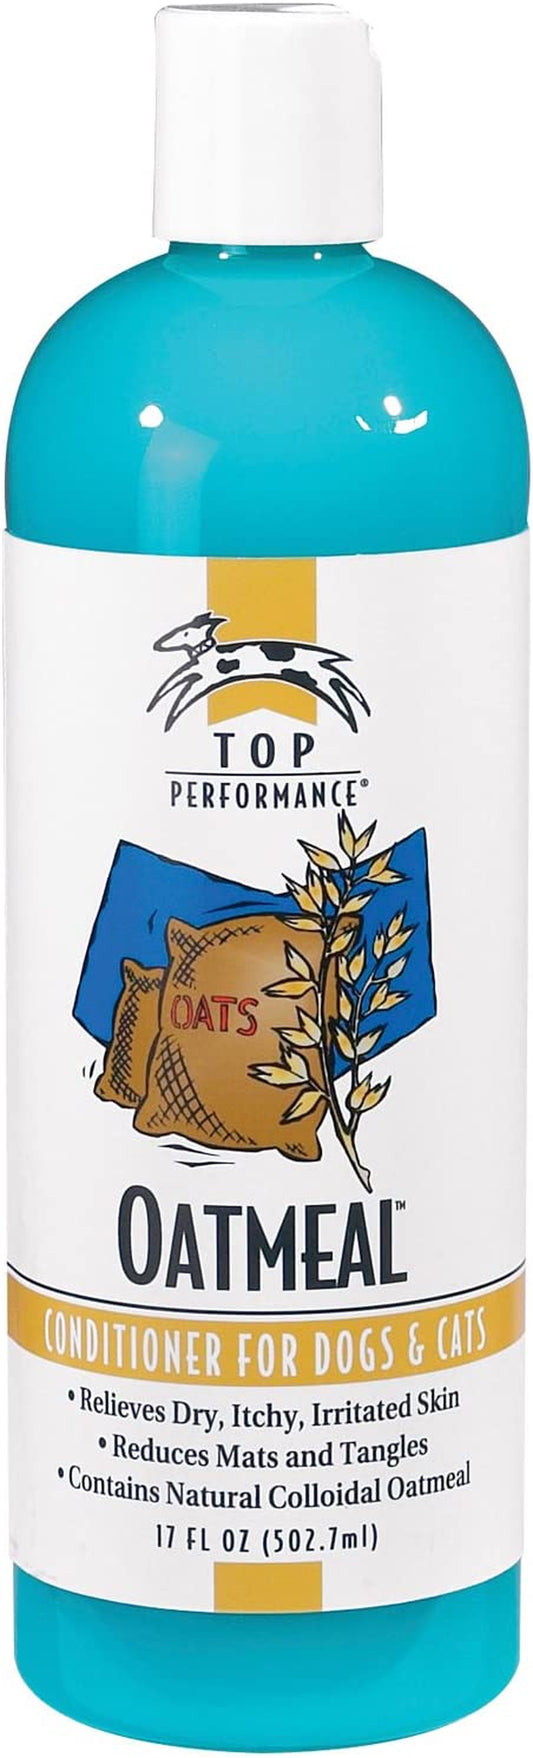 Top Performance Oatmeal Pet Conditioner for Bathing Dogs and Cats in 17 Oz. Size – Restores Moisture to Dry, Itchy Skin